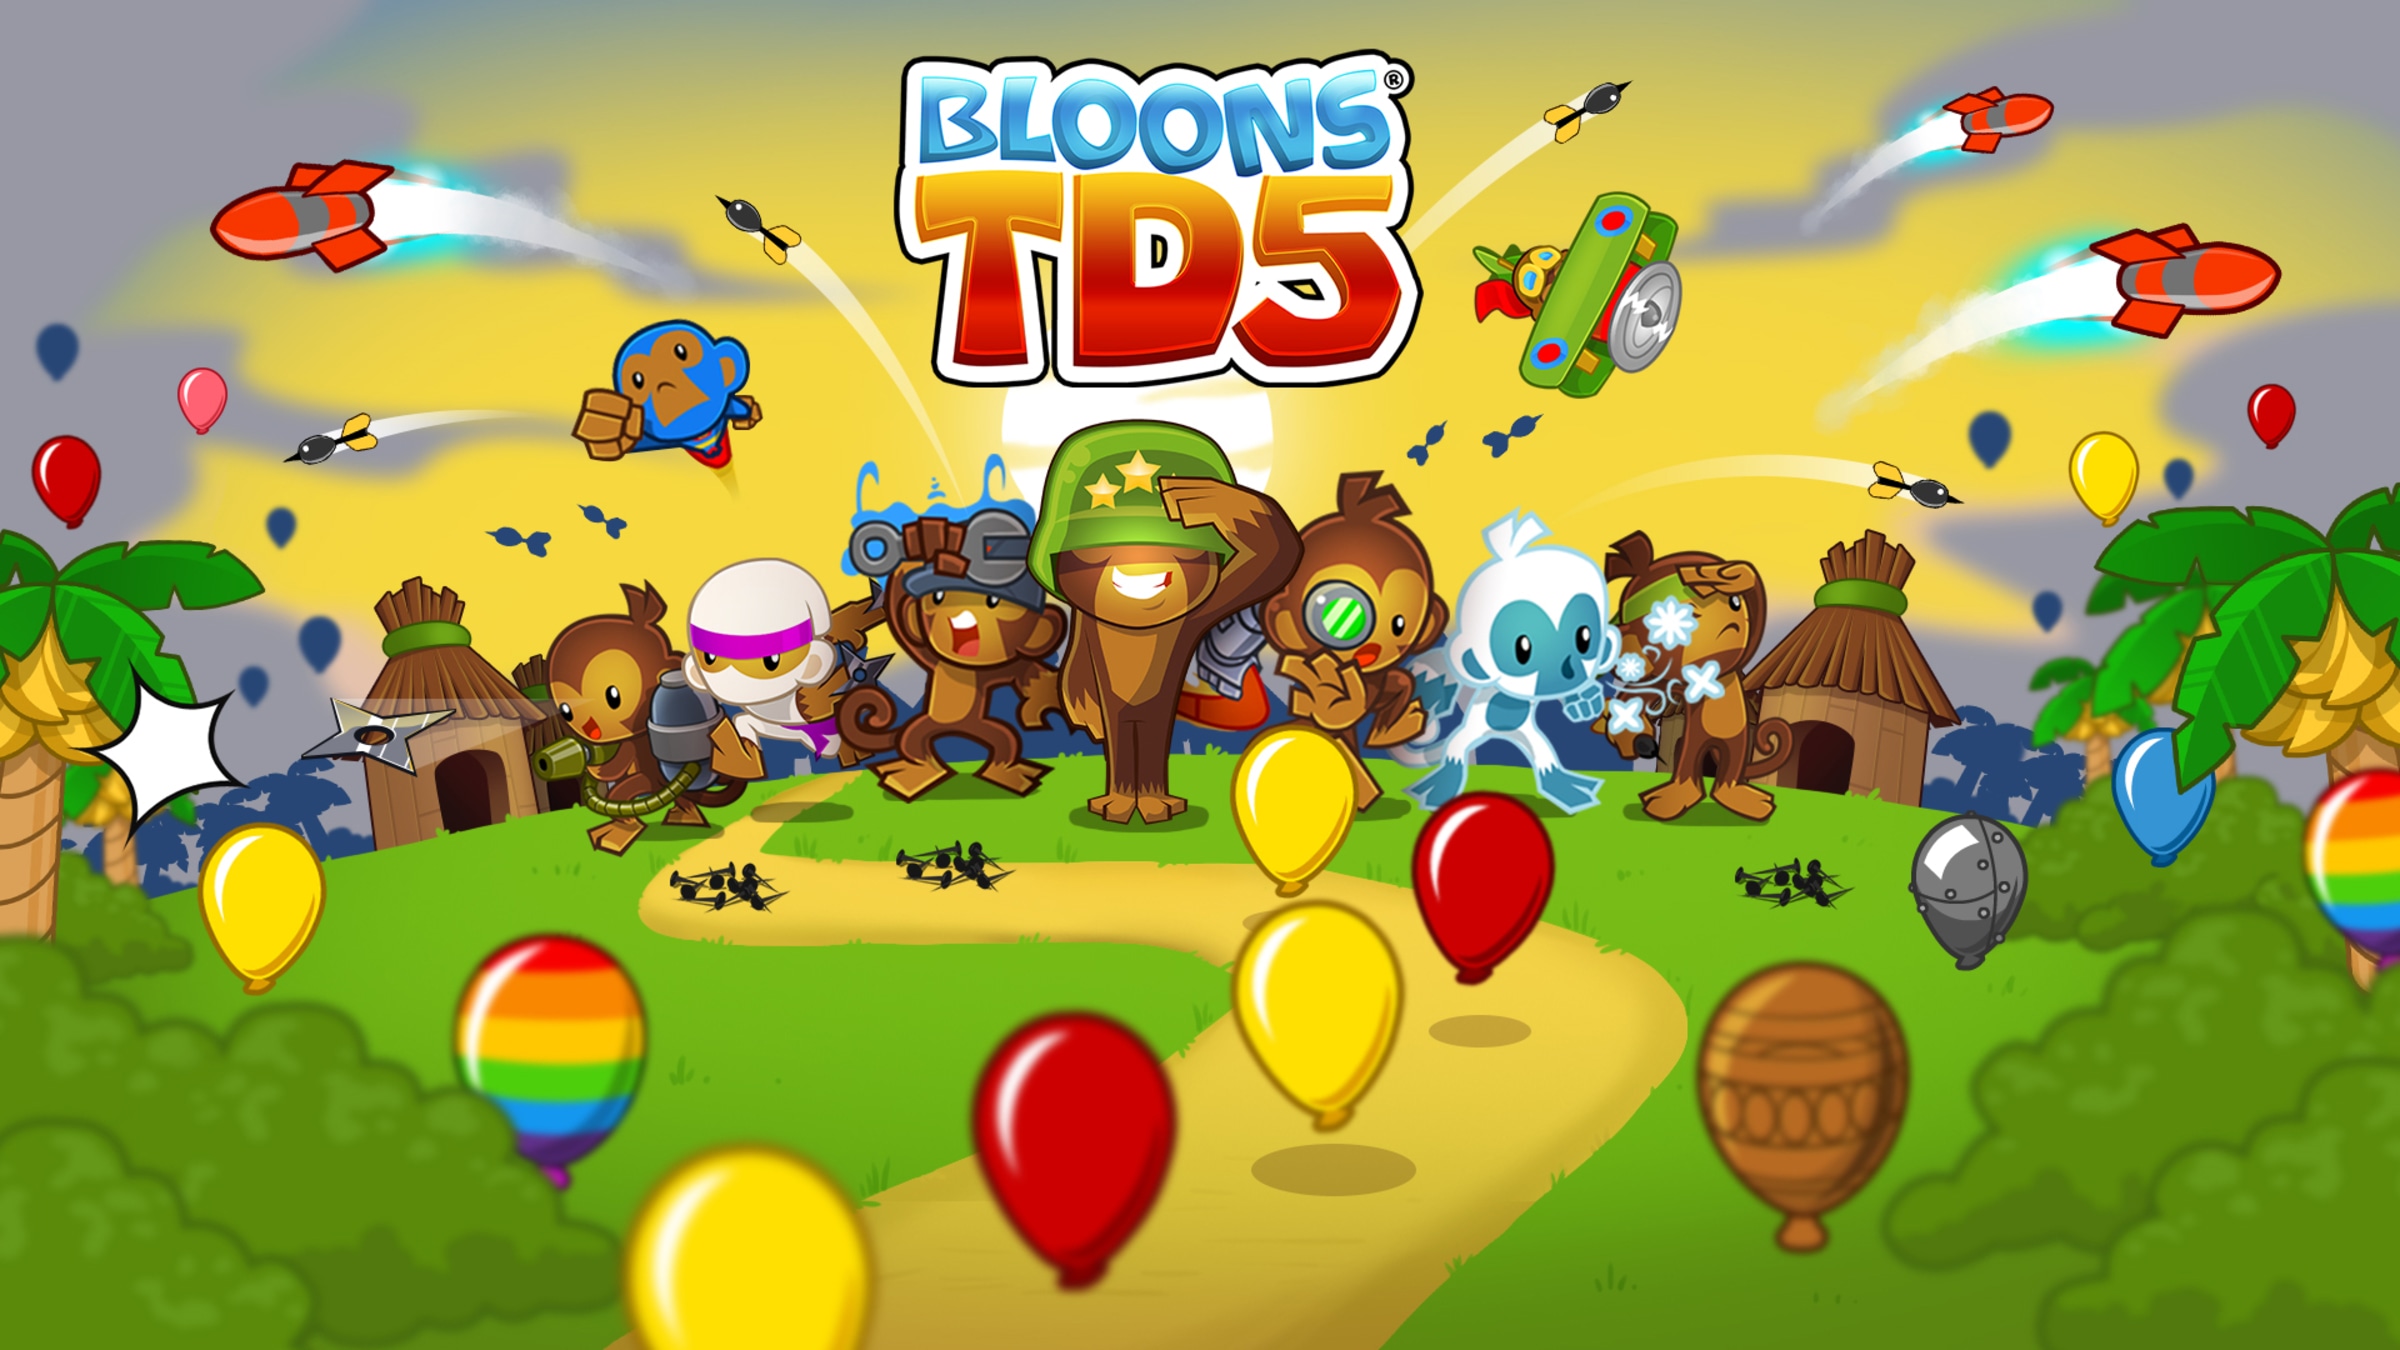 Bloons Td 5 For Nintendo Switch - Nintendo Official Site